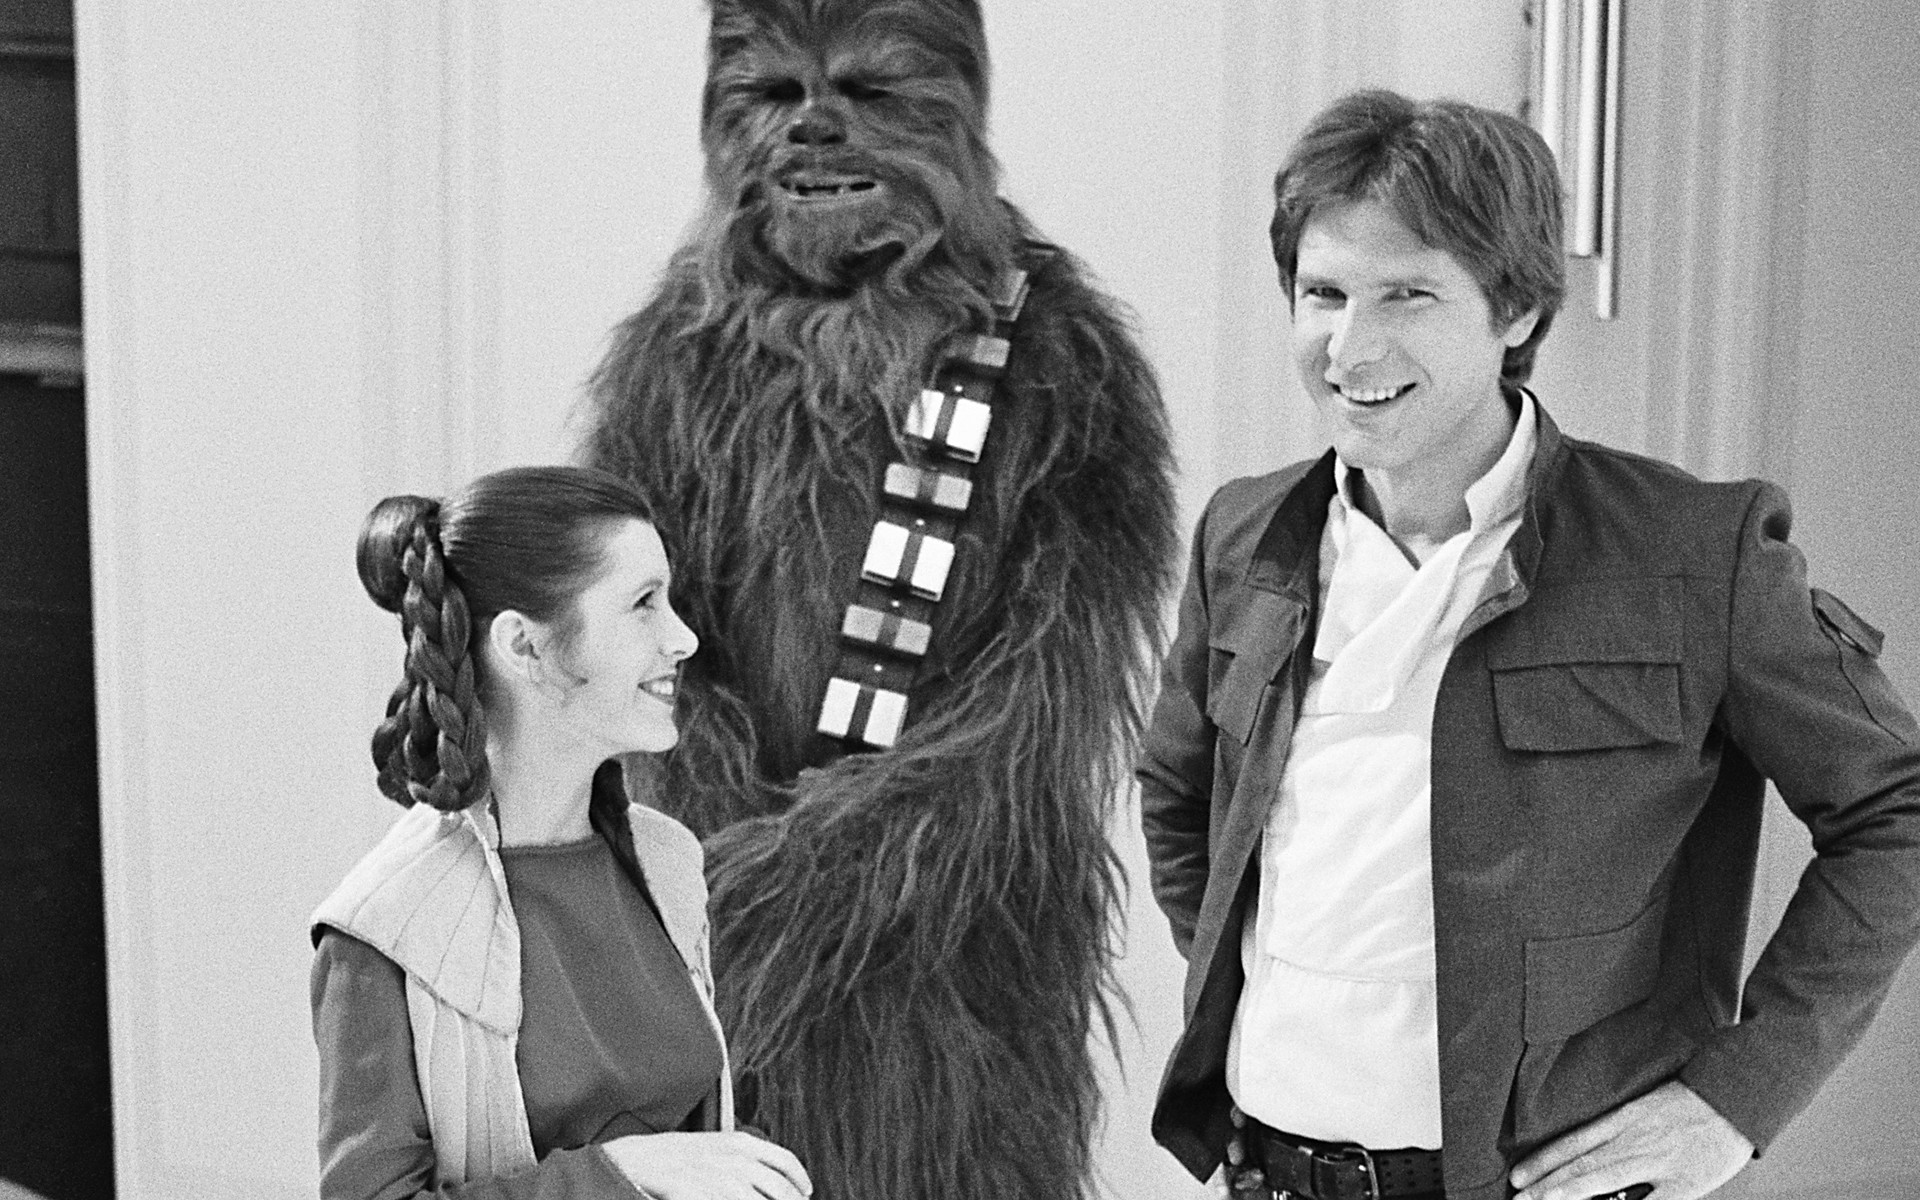 1920x1200 ... Ford Chewbacca BW Carrie Fisher Princess Leia sci-fi movies black white  classic wookie people men males wmone females babes actor actress wallpaper  ...